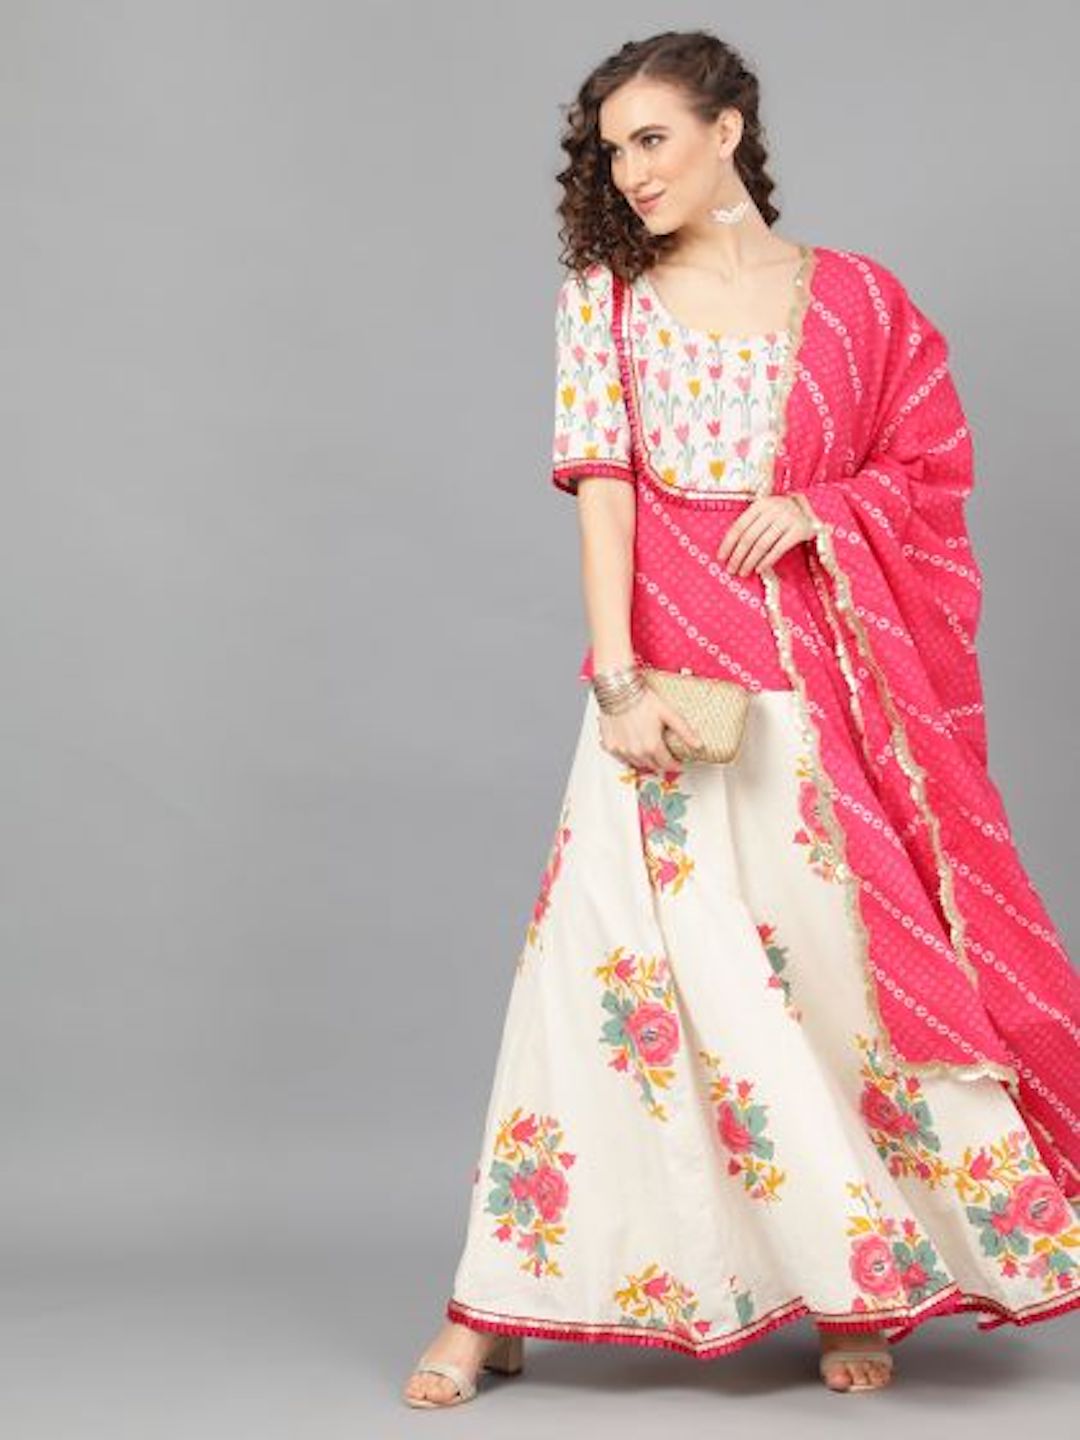 White lehenga with pink embroidered bandhej dupatta | Indian outfits lehenga,  Dress indian style, Indian designer outfits